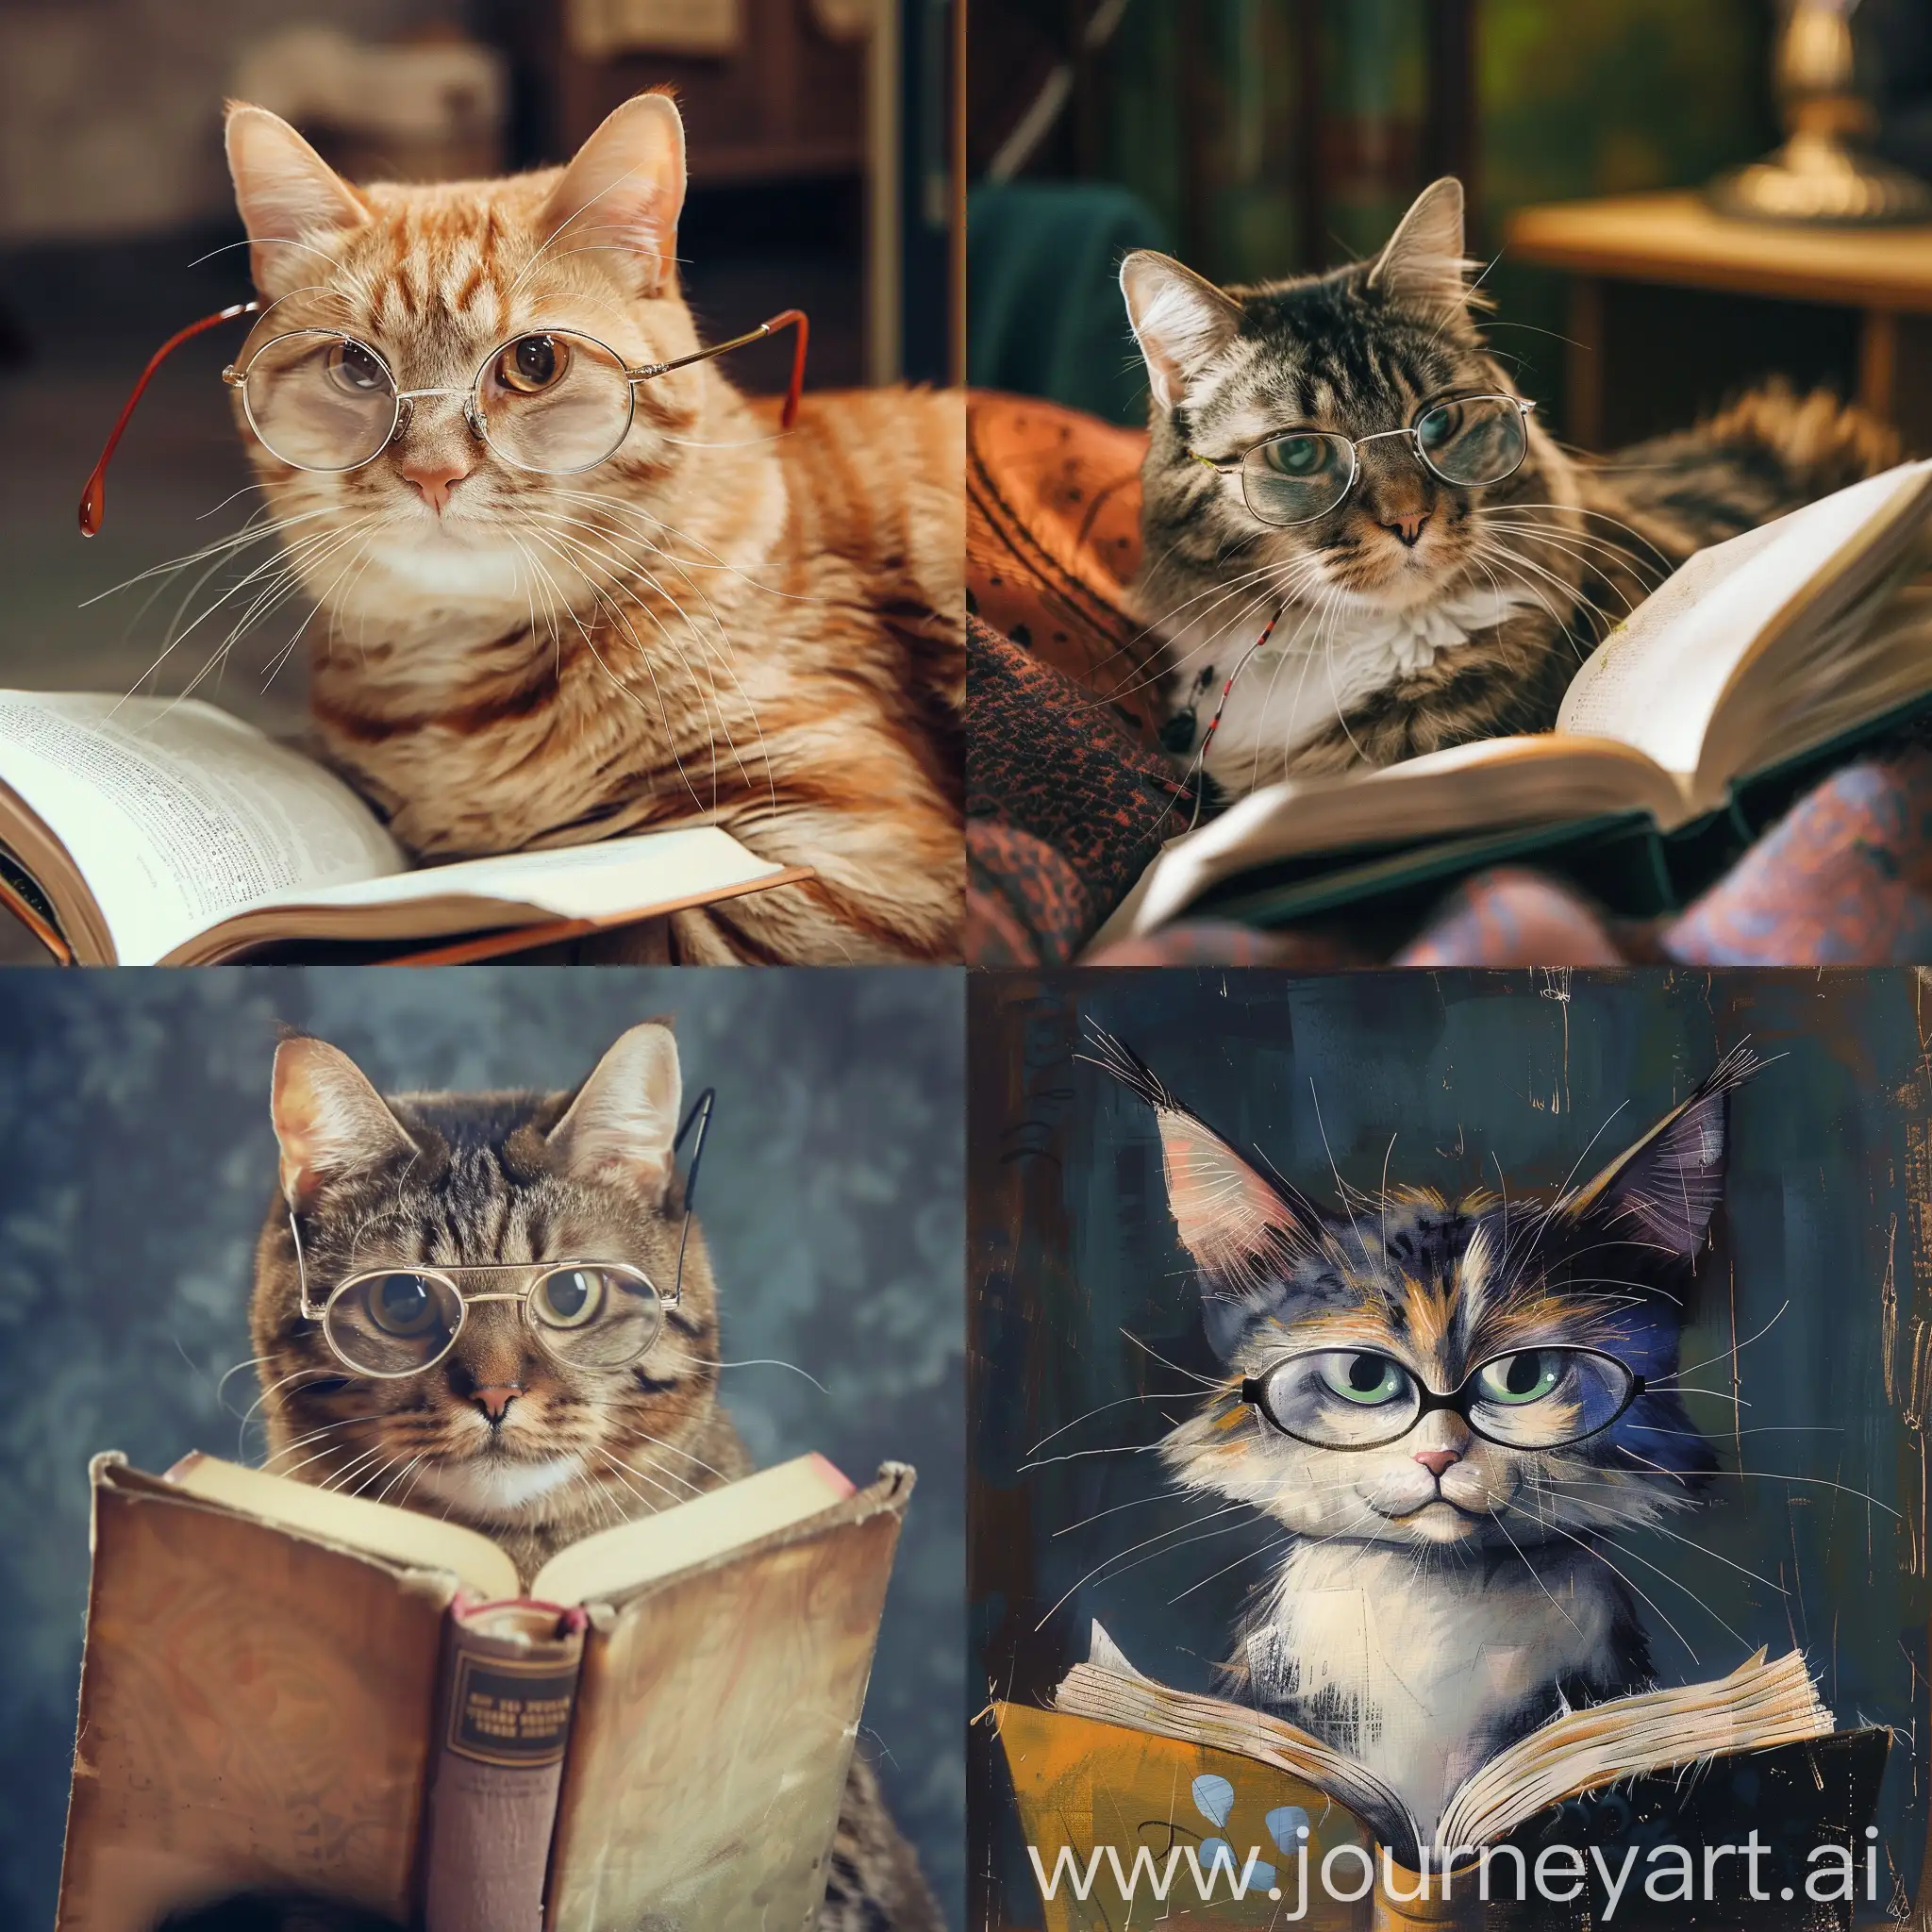 Intelligent-Cat-Studying-with-Glasses-and-Book